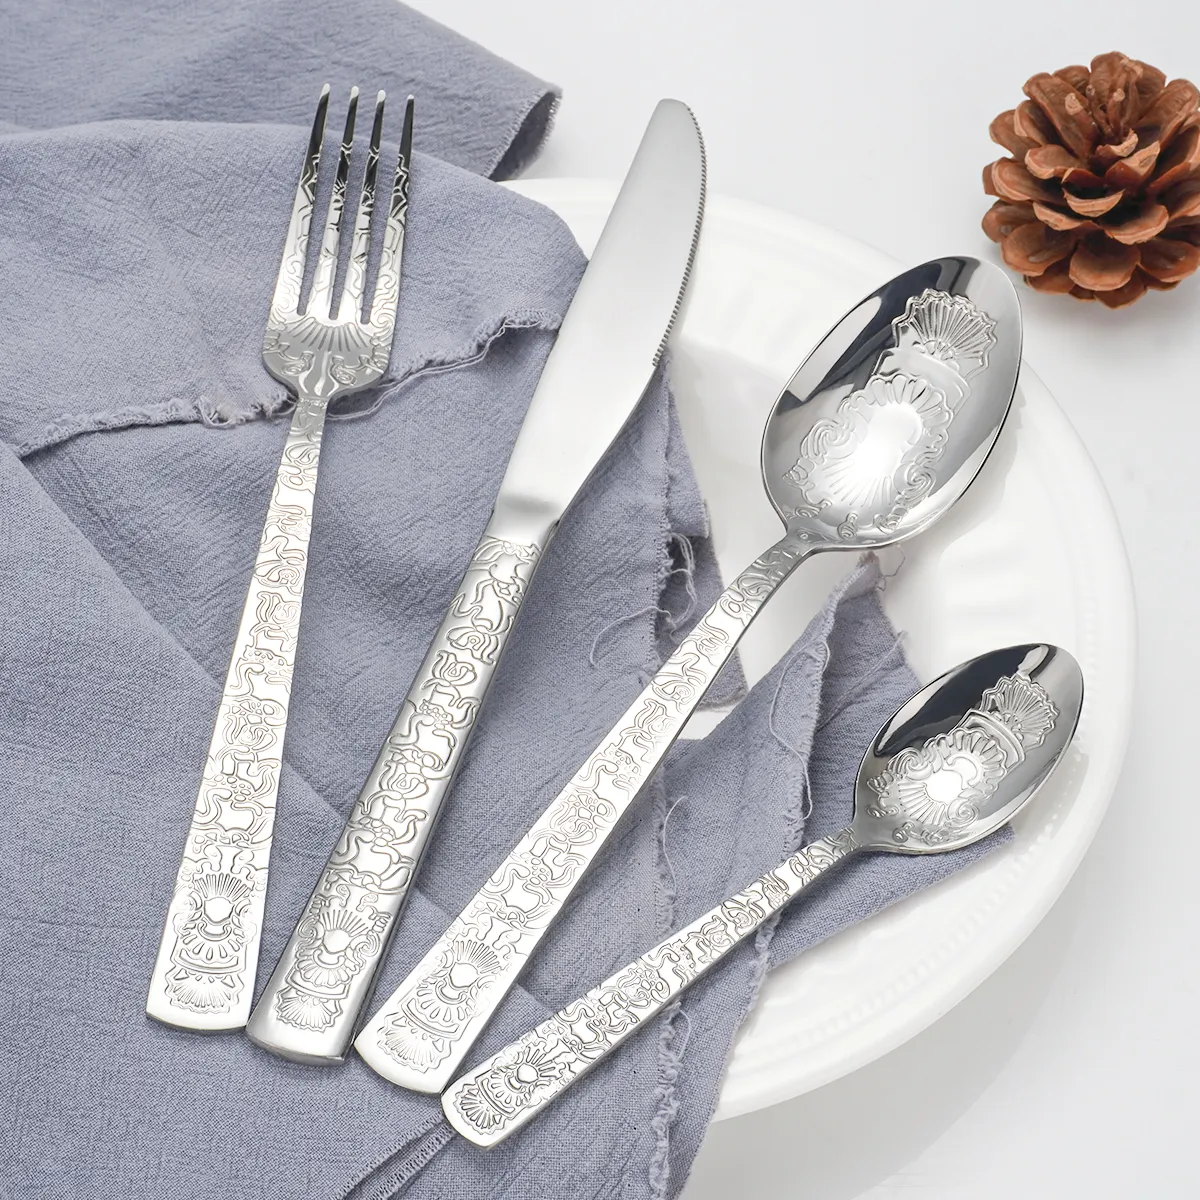 4/84/120/144/168 Pcs Middle East Wedding Silverware Flatware Unique Polished Fork Knife And Spoon Stainless Steel Cutlery Set